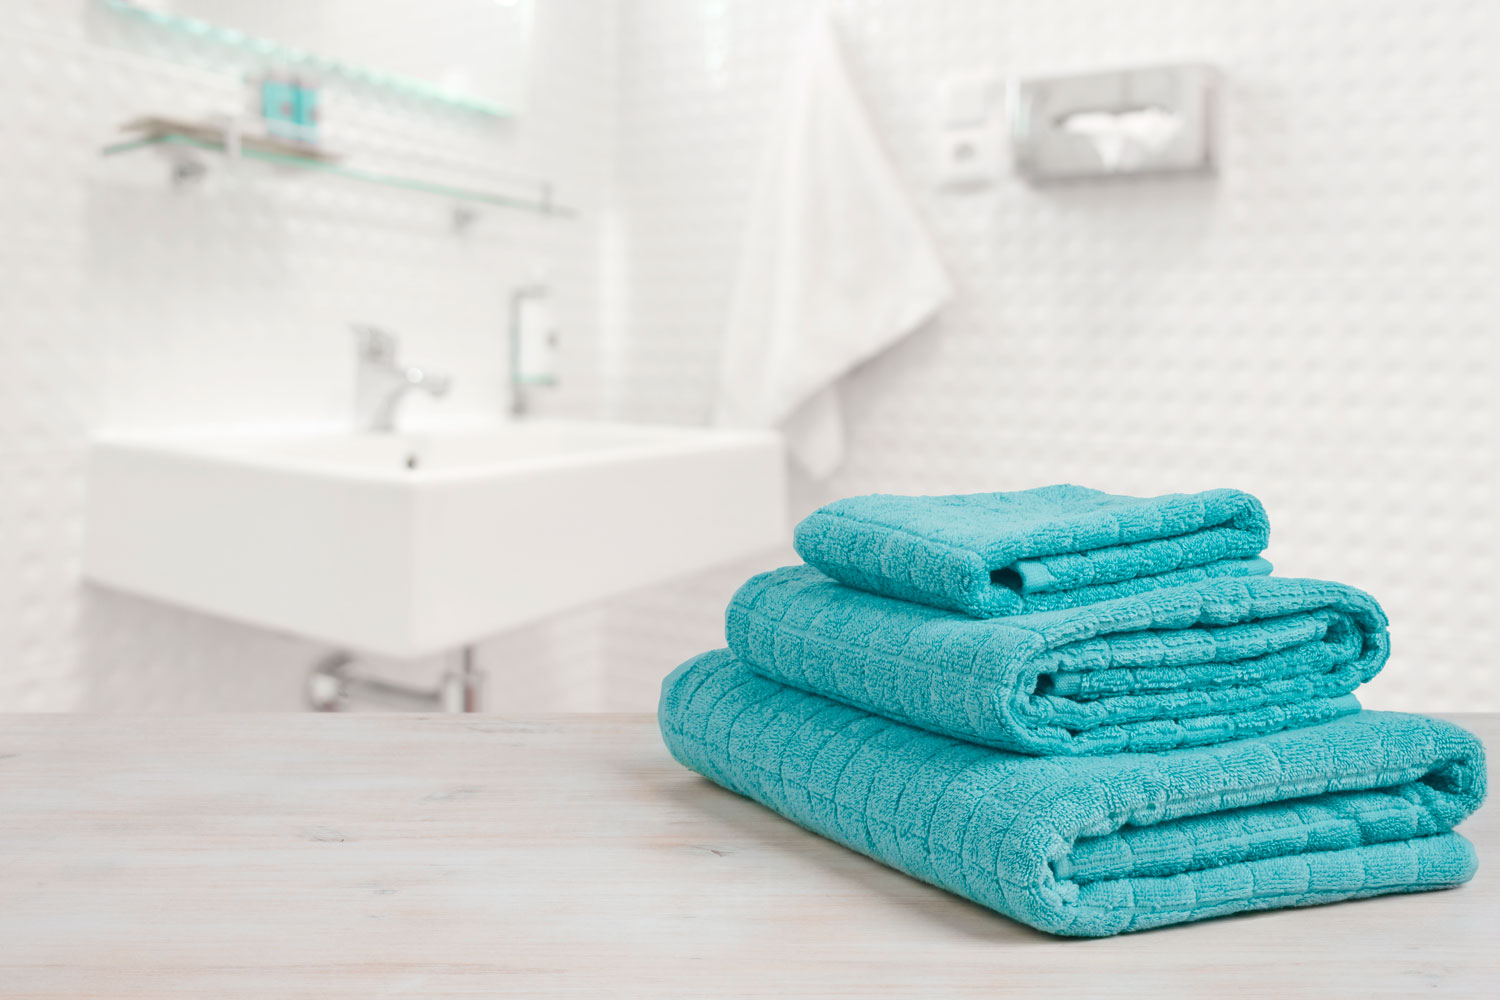 Three different sizes of sky blue colored towels inside a white bathroom